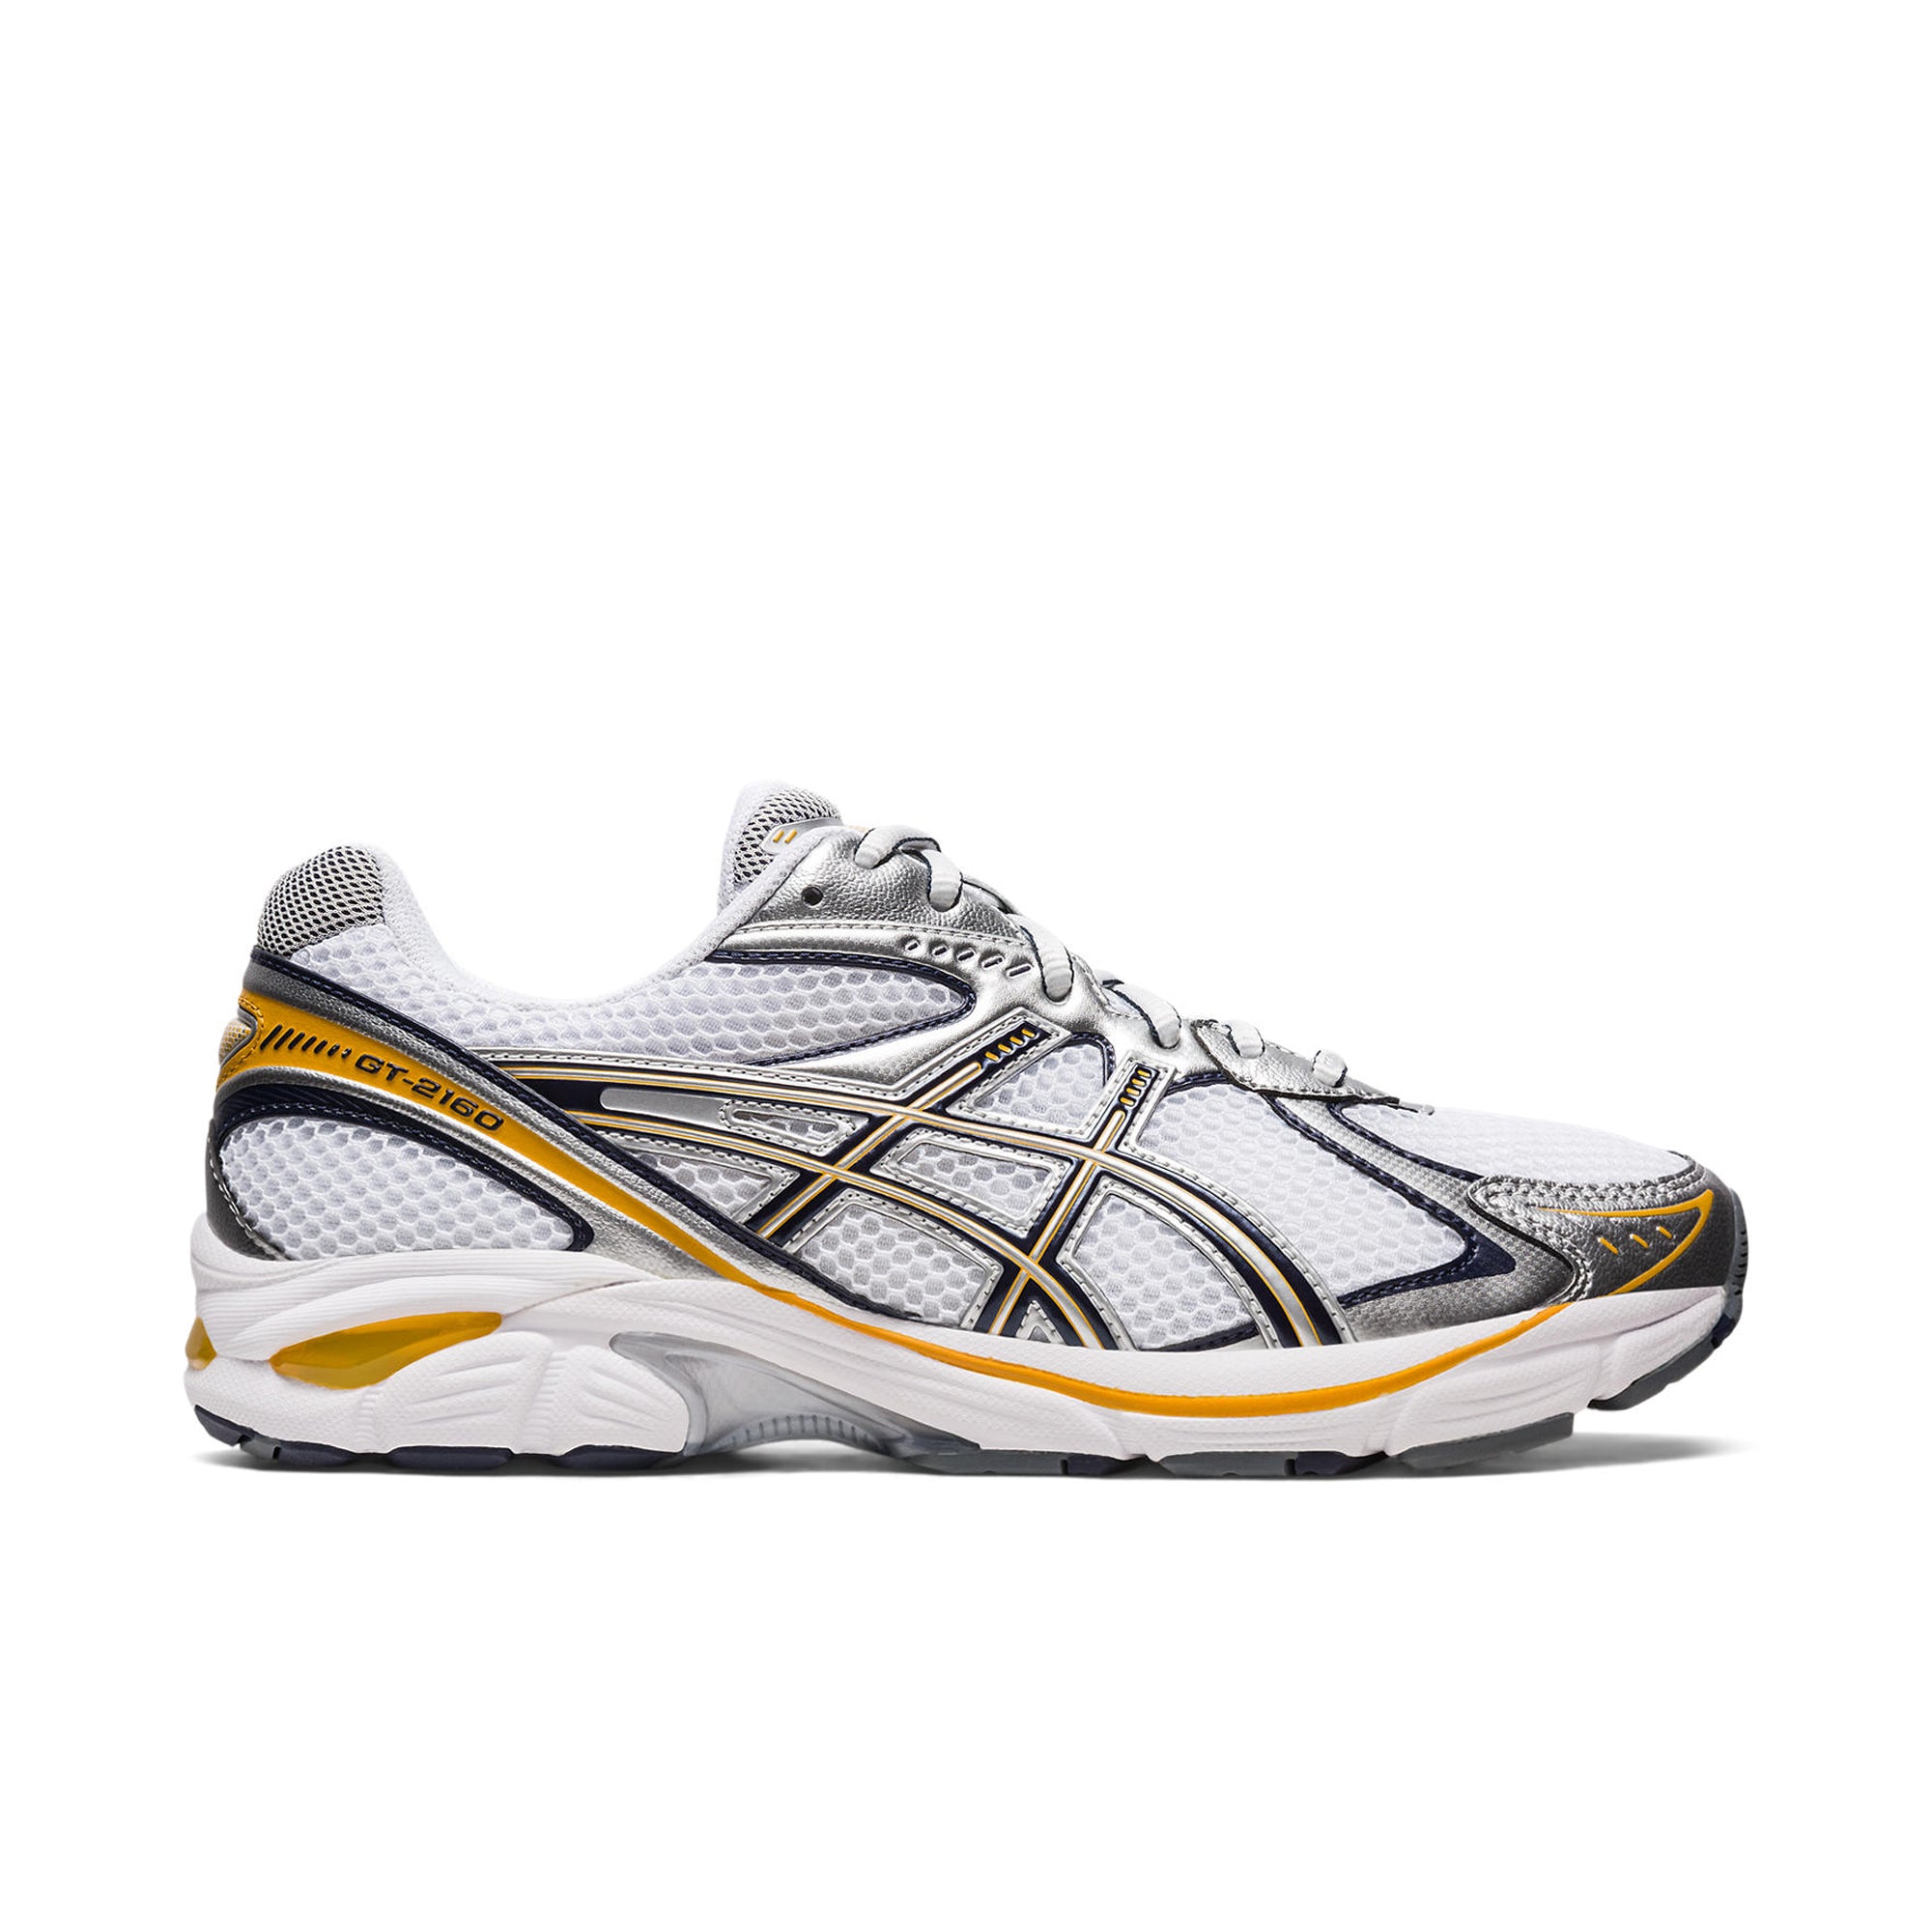 ASICS - Gt-2160 - (White/Pure Silver) view 1